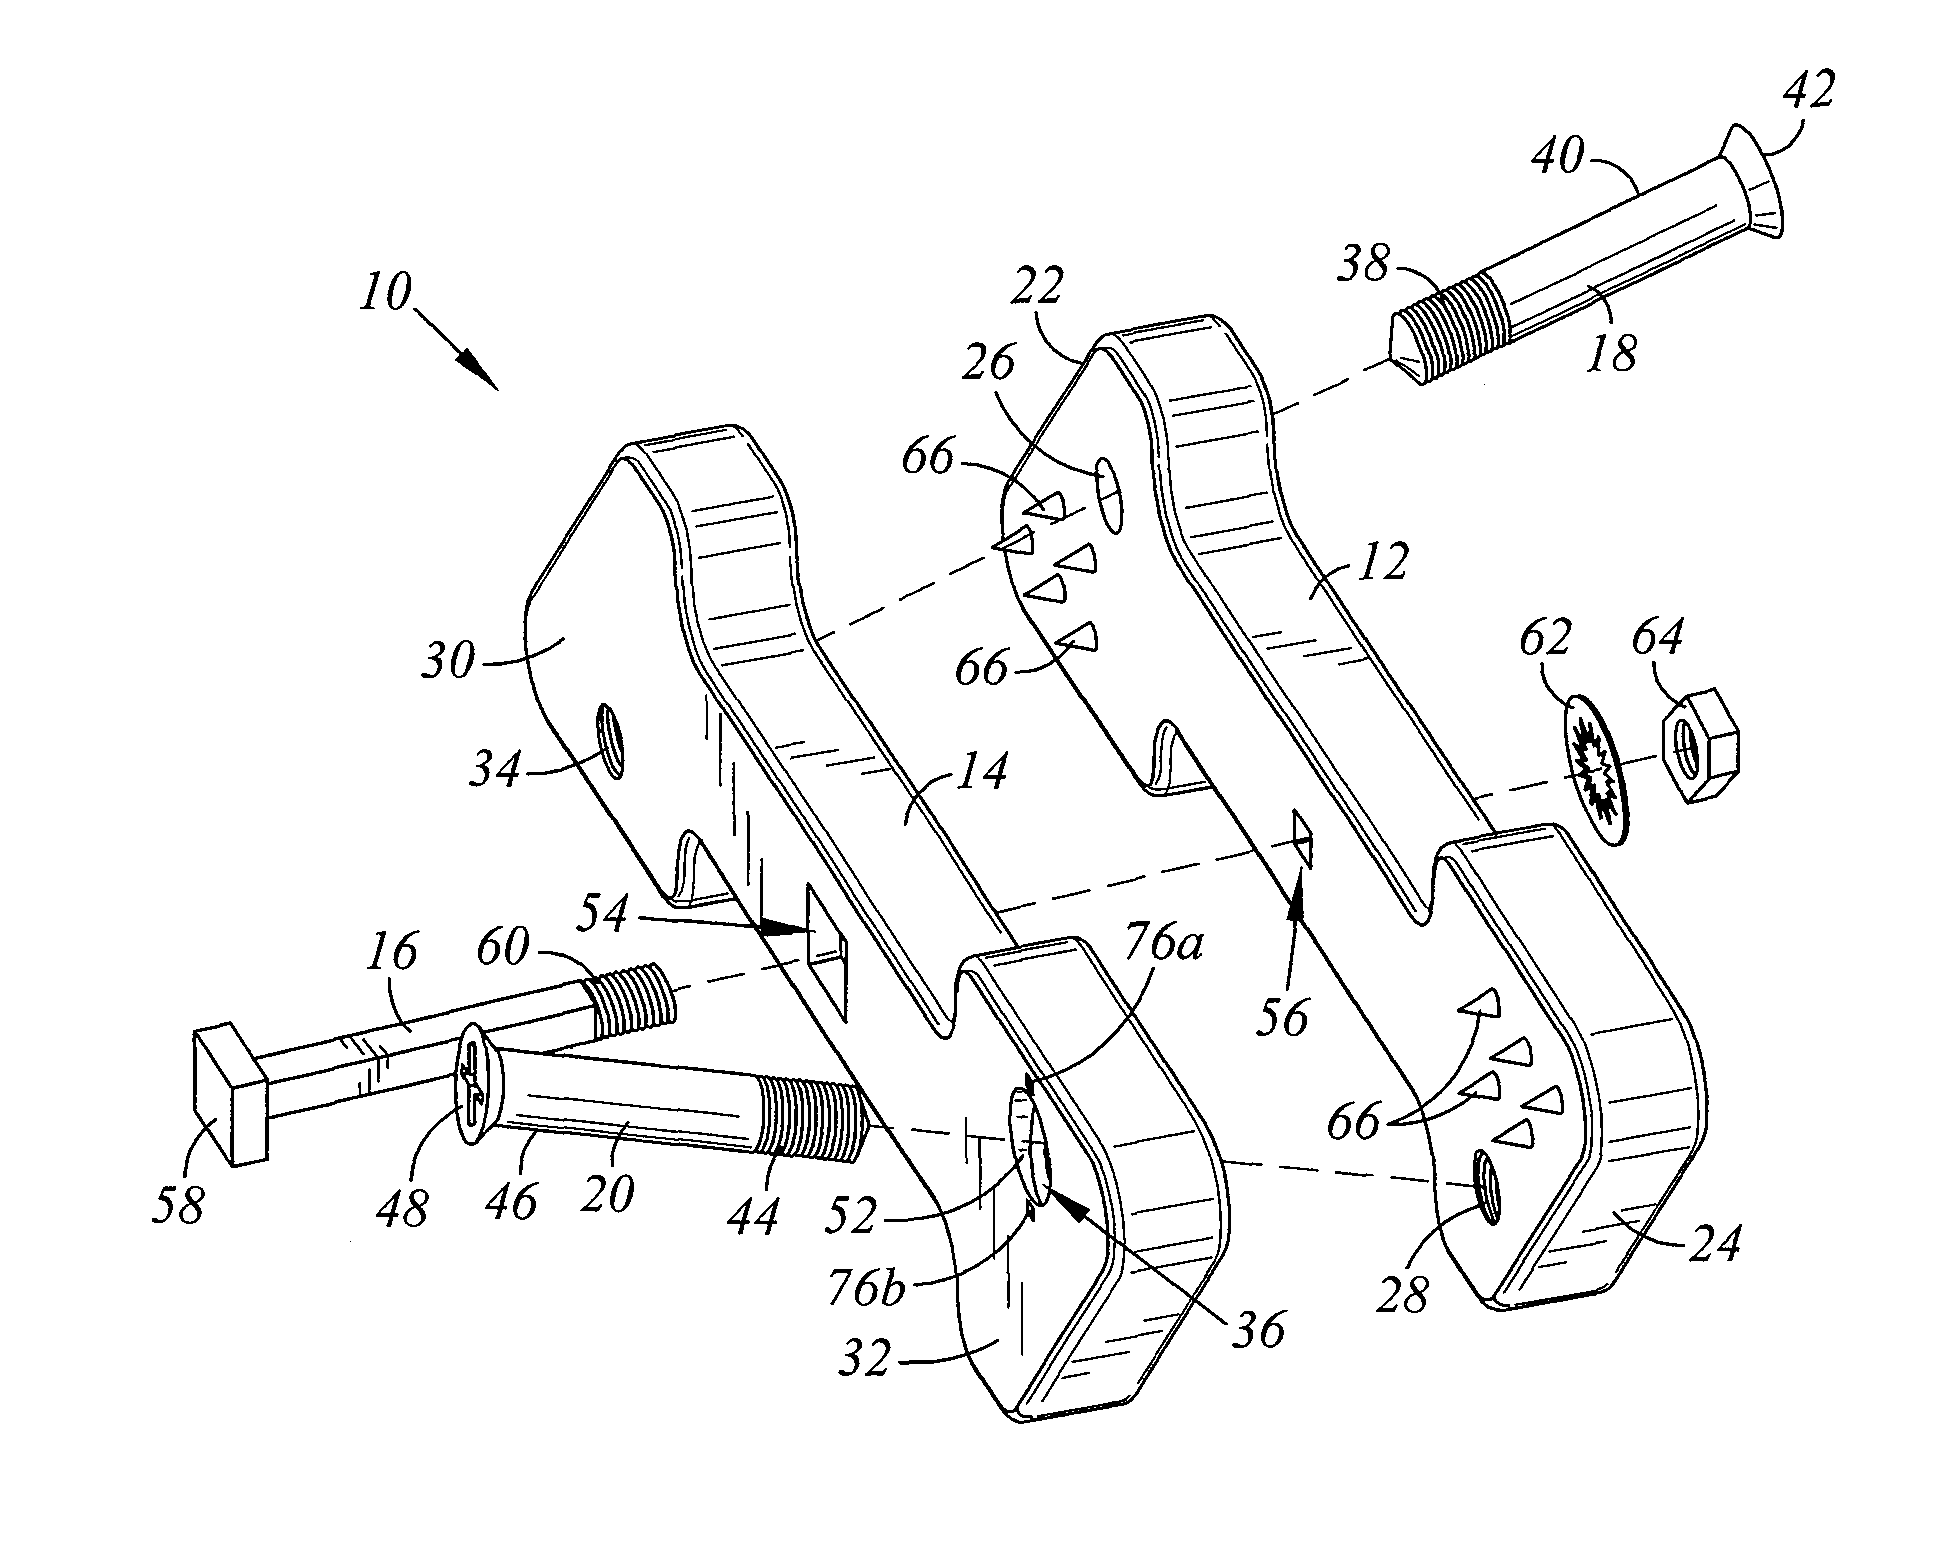 Spinal implant device with fixation plates and lag screws and method of implanting